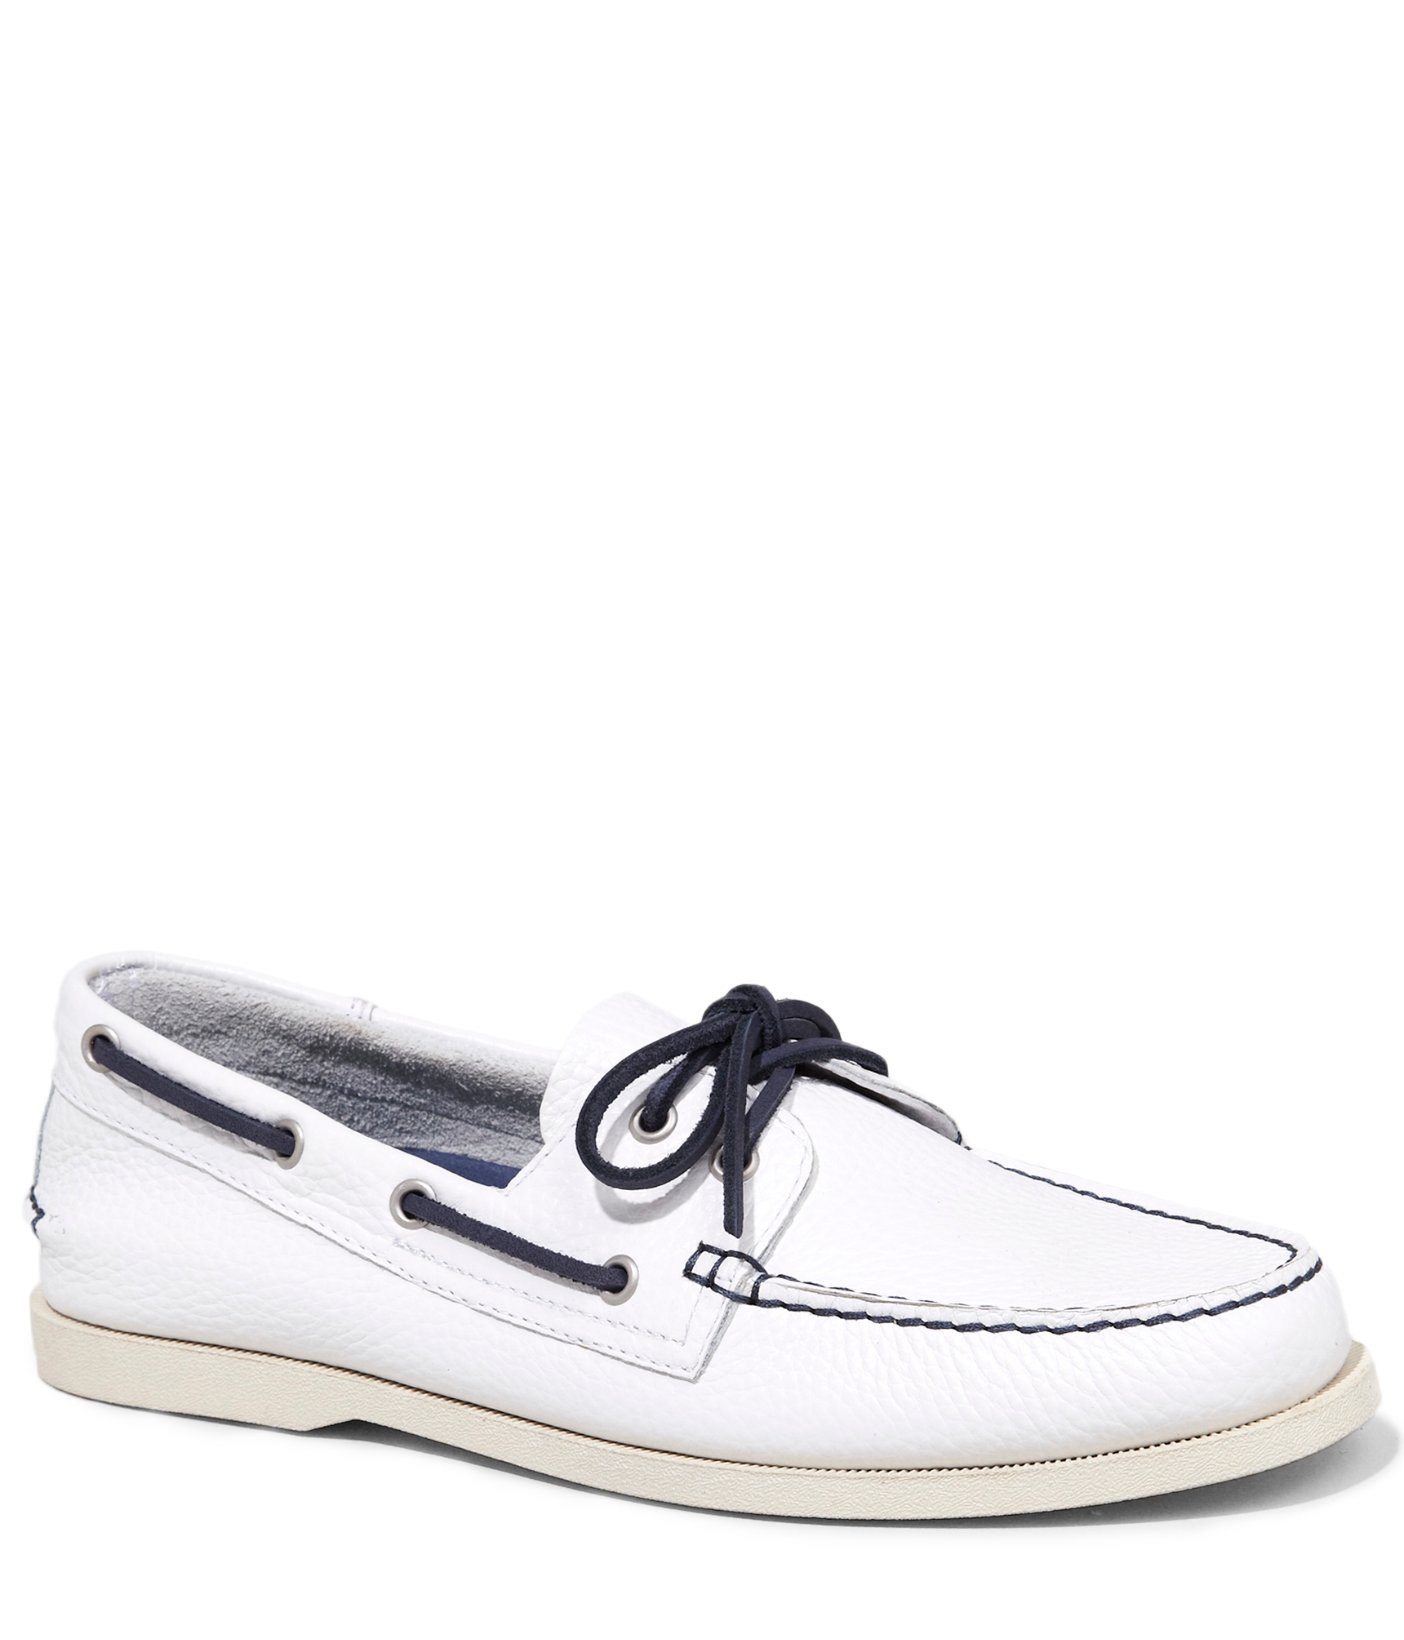 Express Leather Boat Shoe in White for Men (PURE WHITE) Lyst